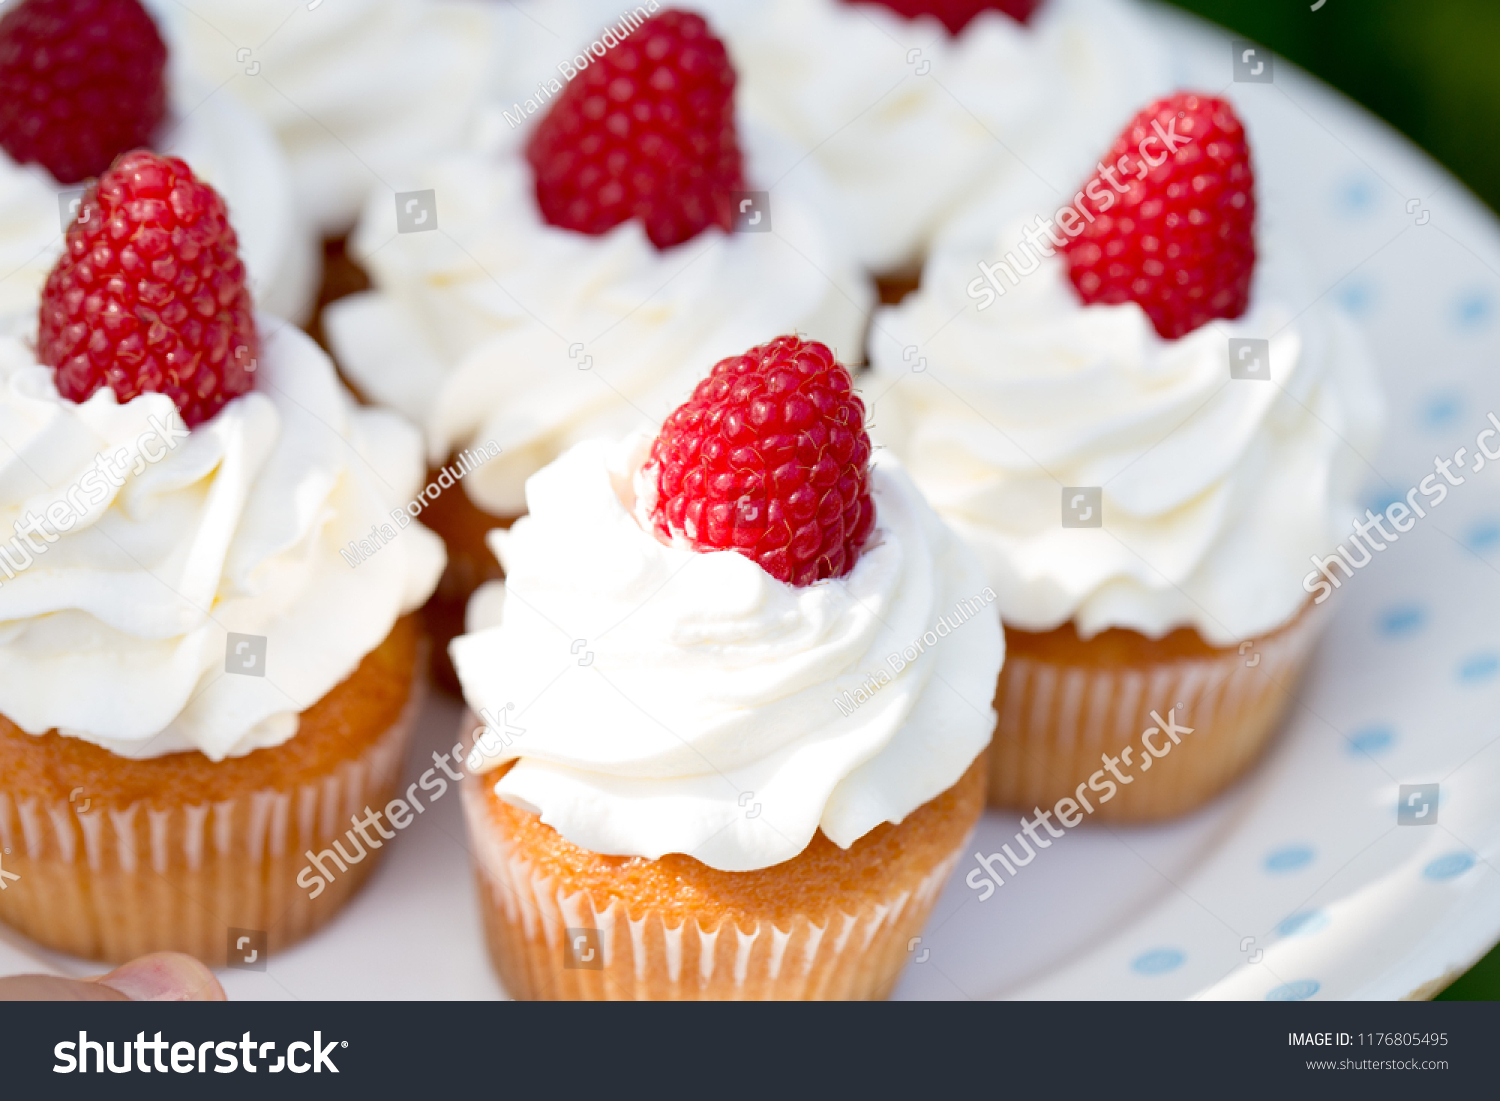 home made delicious cupcakes with creamchees and raspberries on top / family life concept #1176805495